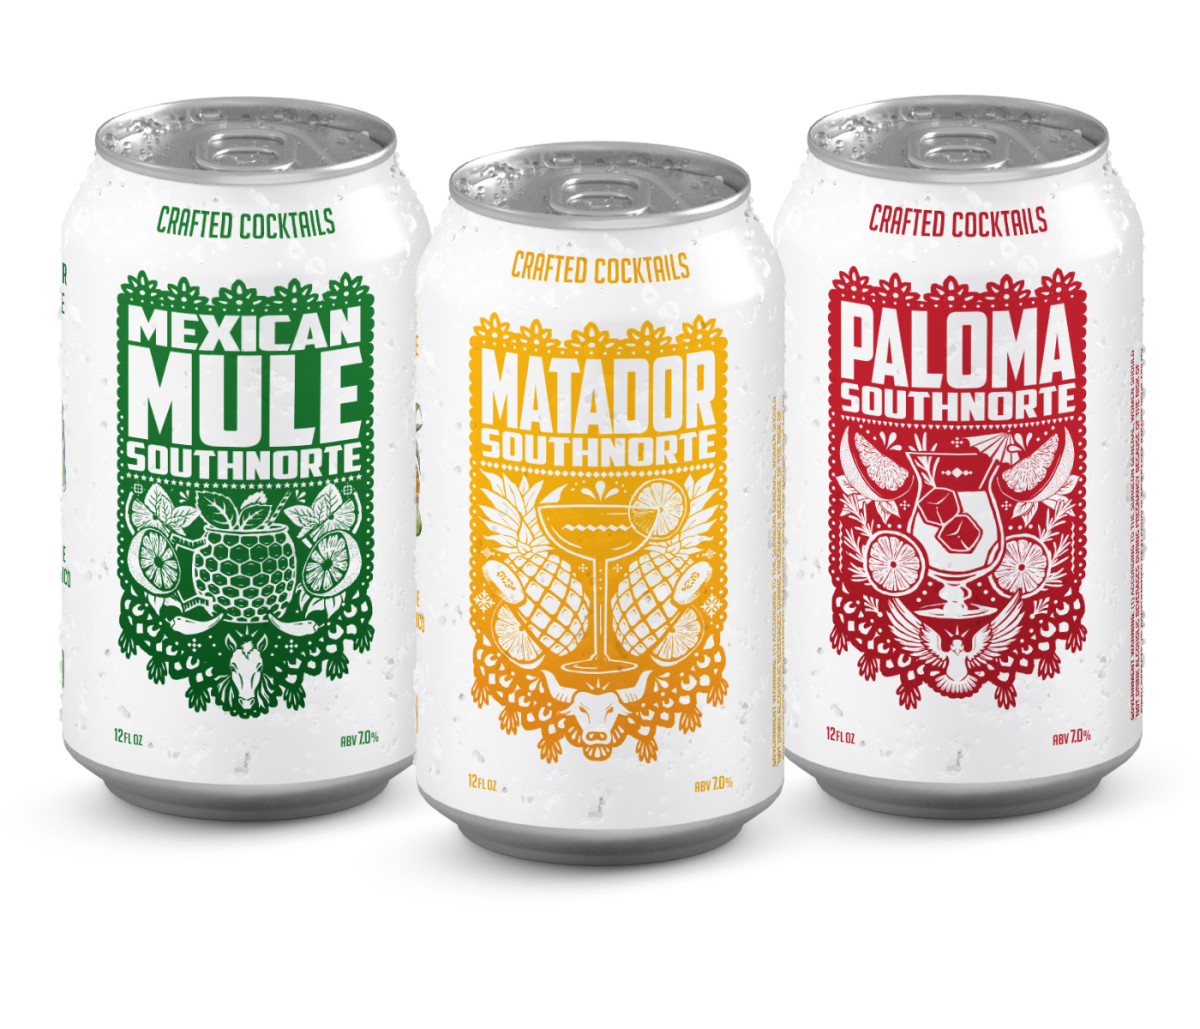 SouthNorte's canned cocktails include flavors like Mexican Mule, Matador and Paloma.